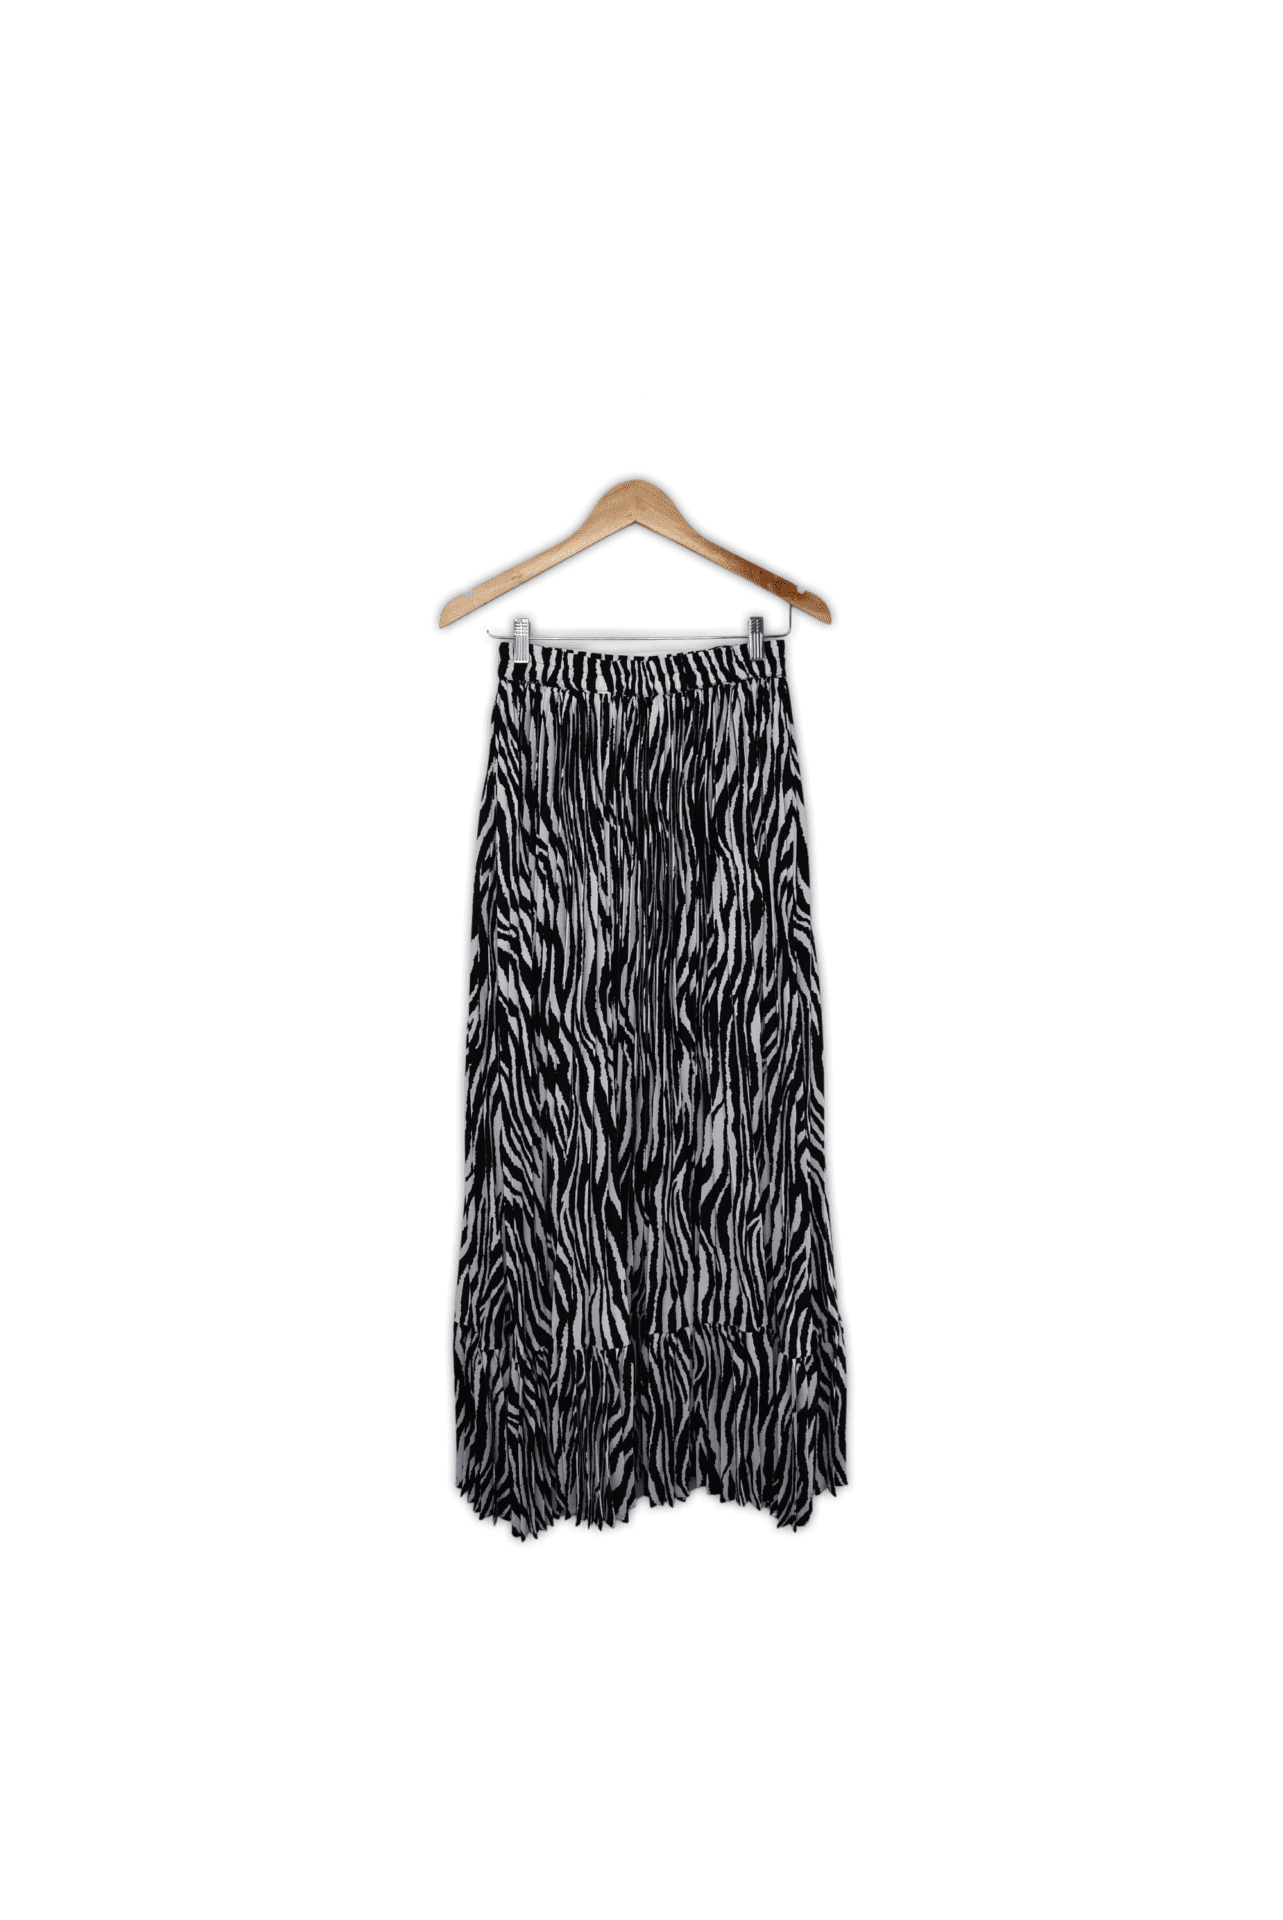 Maxi skirt with a ruffle hem panel, an elasticated waist band and an accordion pleated fabric for great movement and drape.. Medium. Polyester. Black and white zebra print.